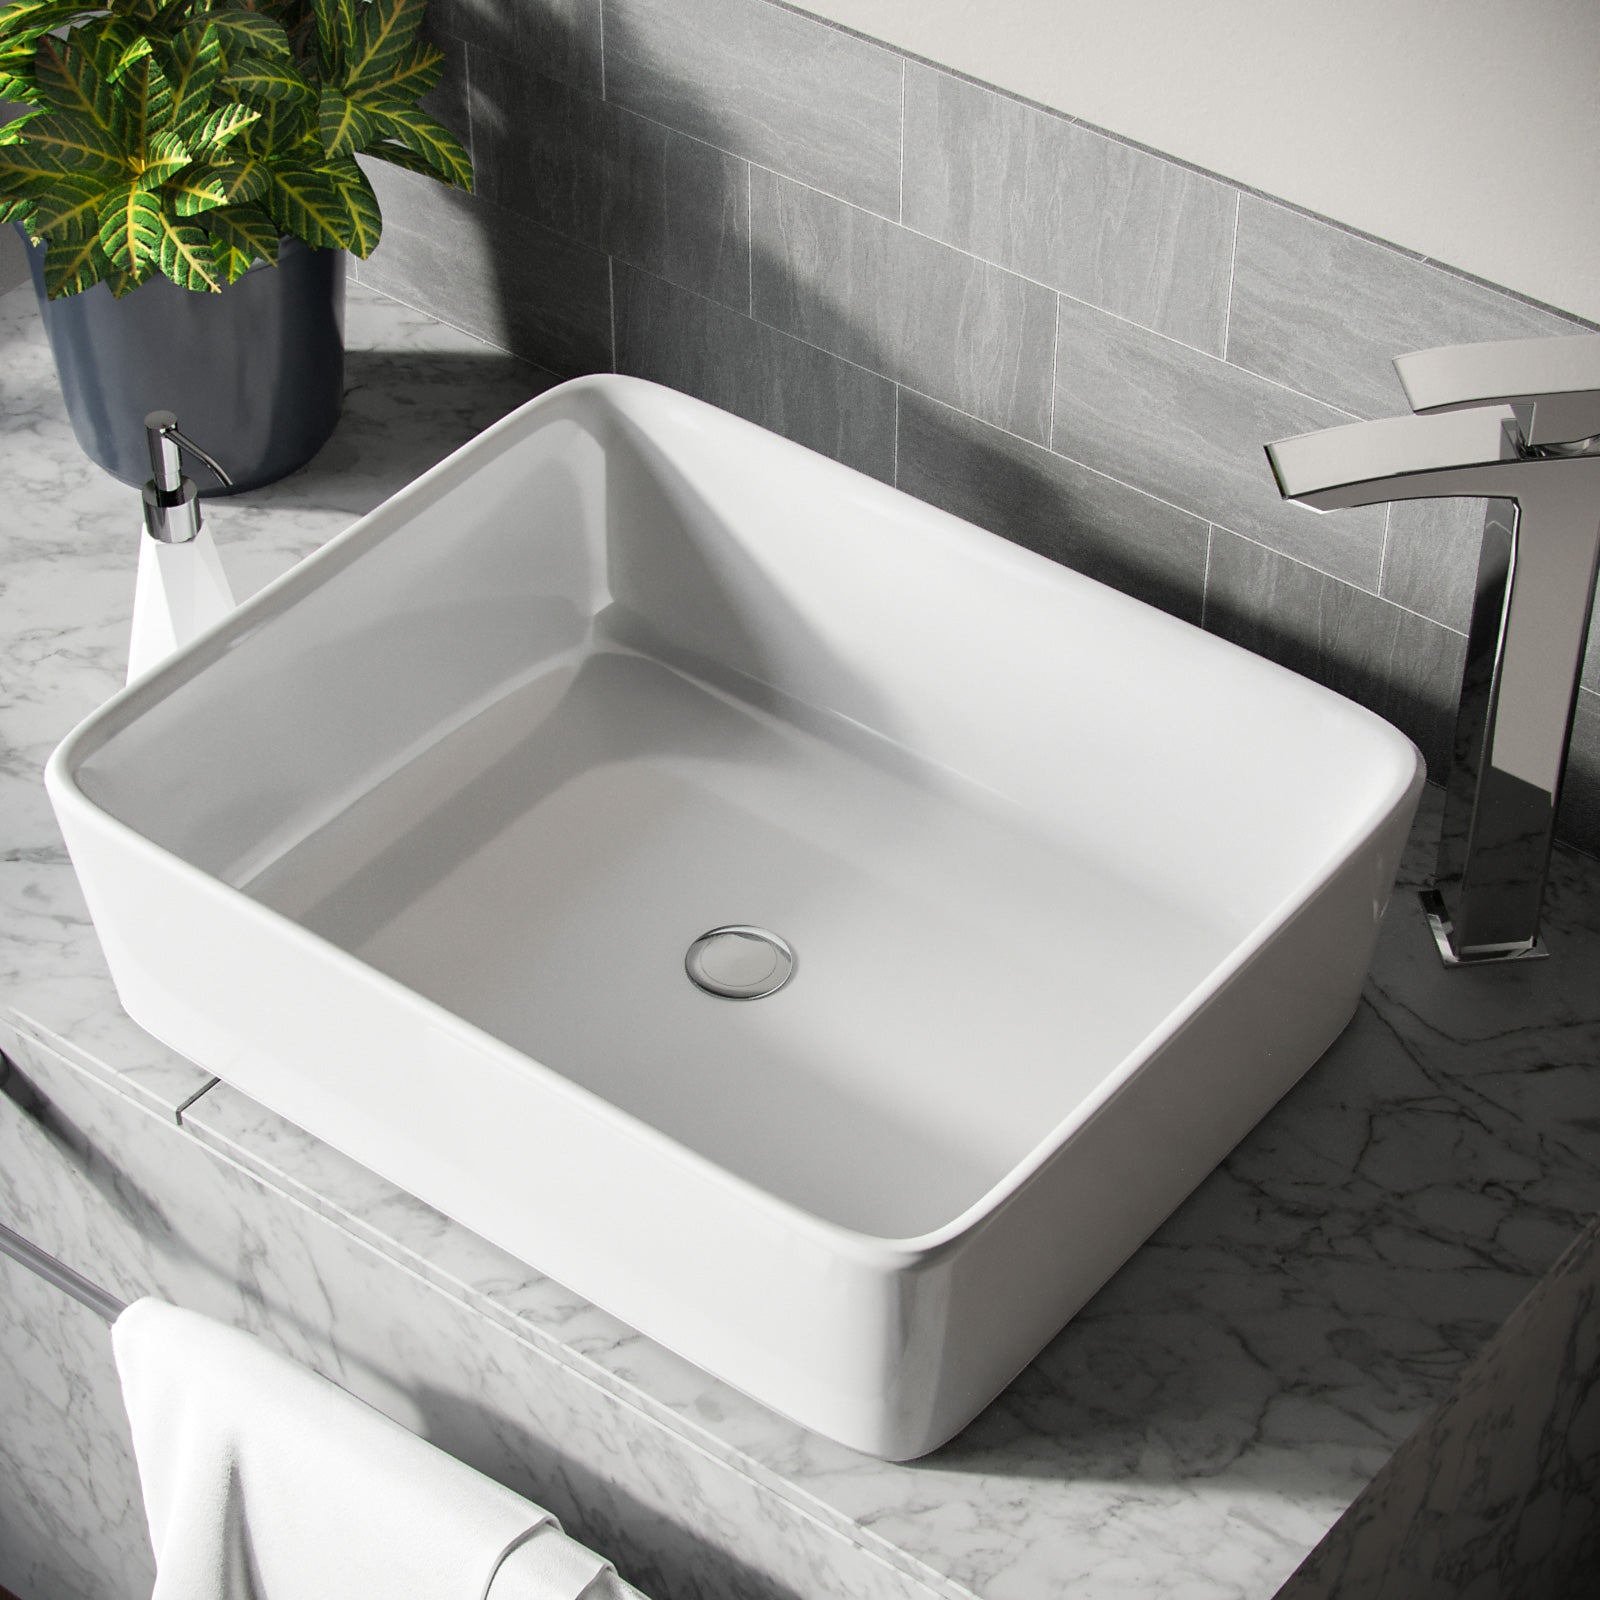 Leven Cloakroom Rectangle Counter Top Basin Bowl